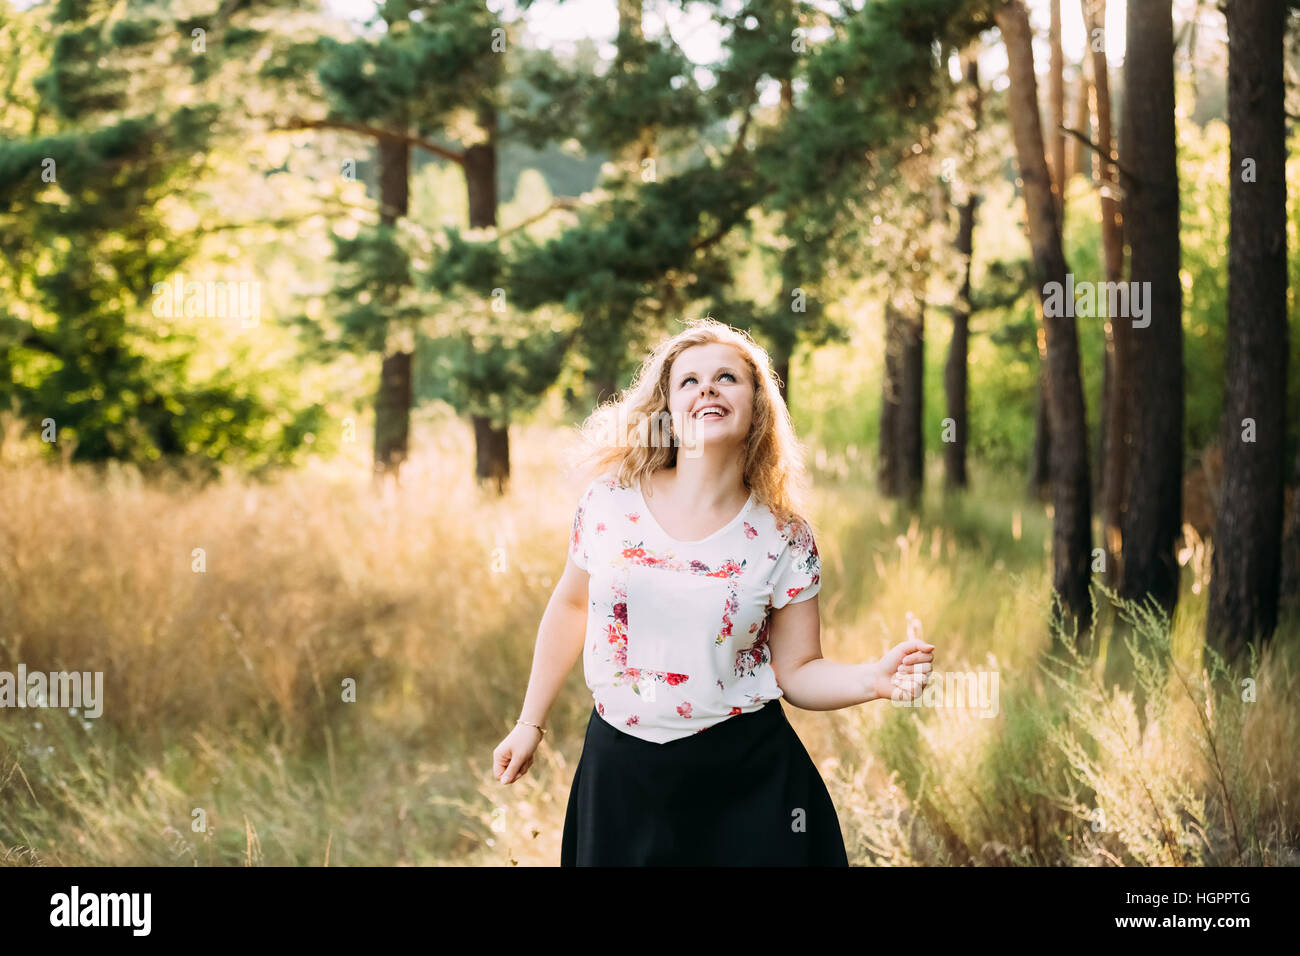 Single Young Pretty Plus Size Caucasian Happy Smiling Laughing Girl Woman In White T-Shirt, Dancing In Summer Green Forest. Fun Enjoy Outdoor Summer N Stock Photo